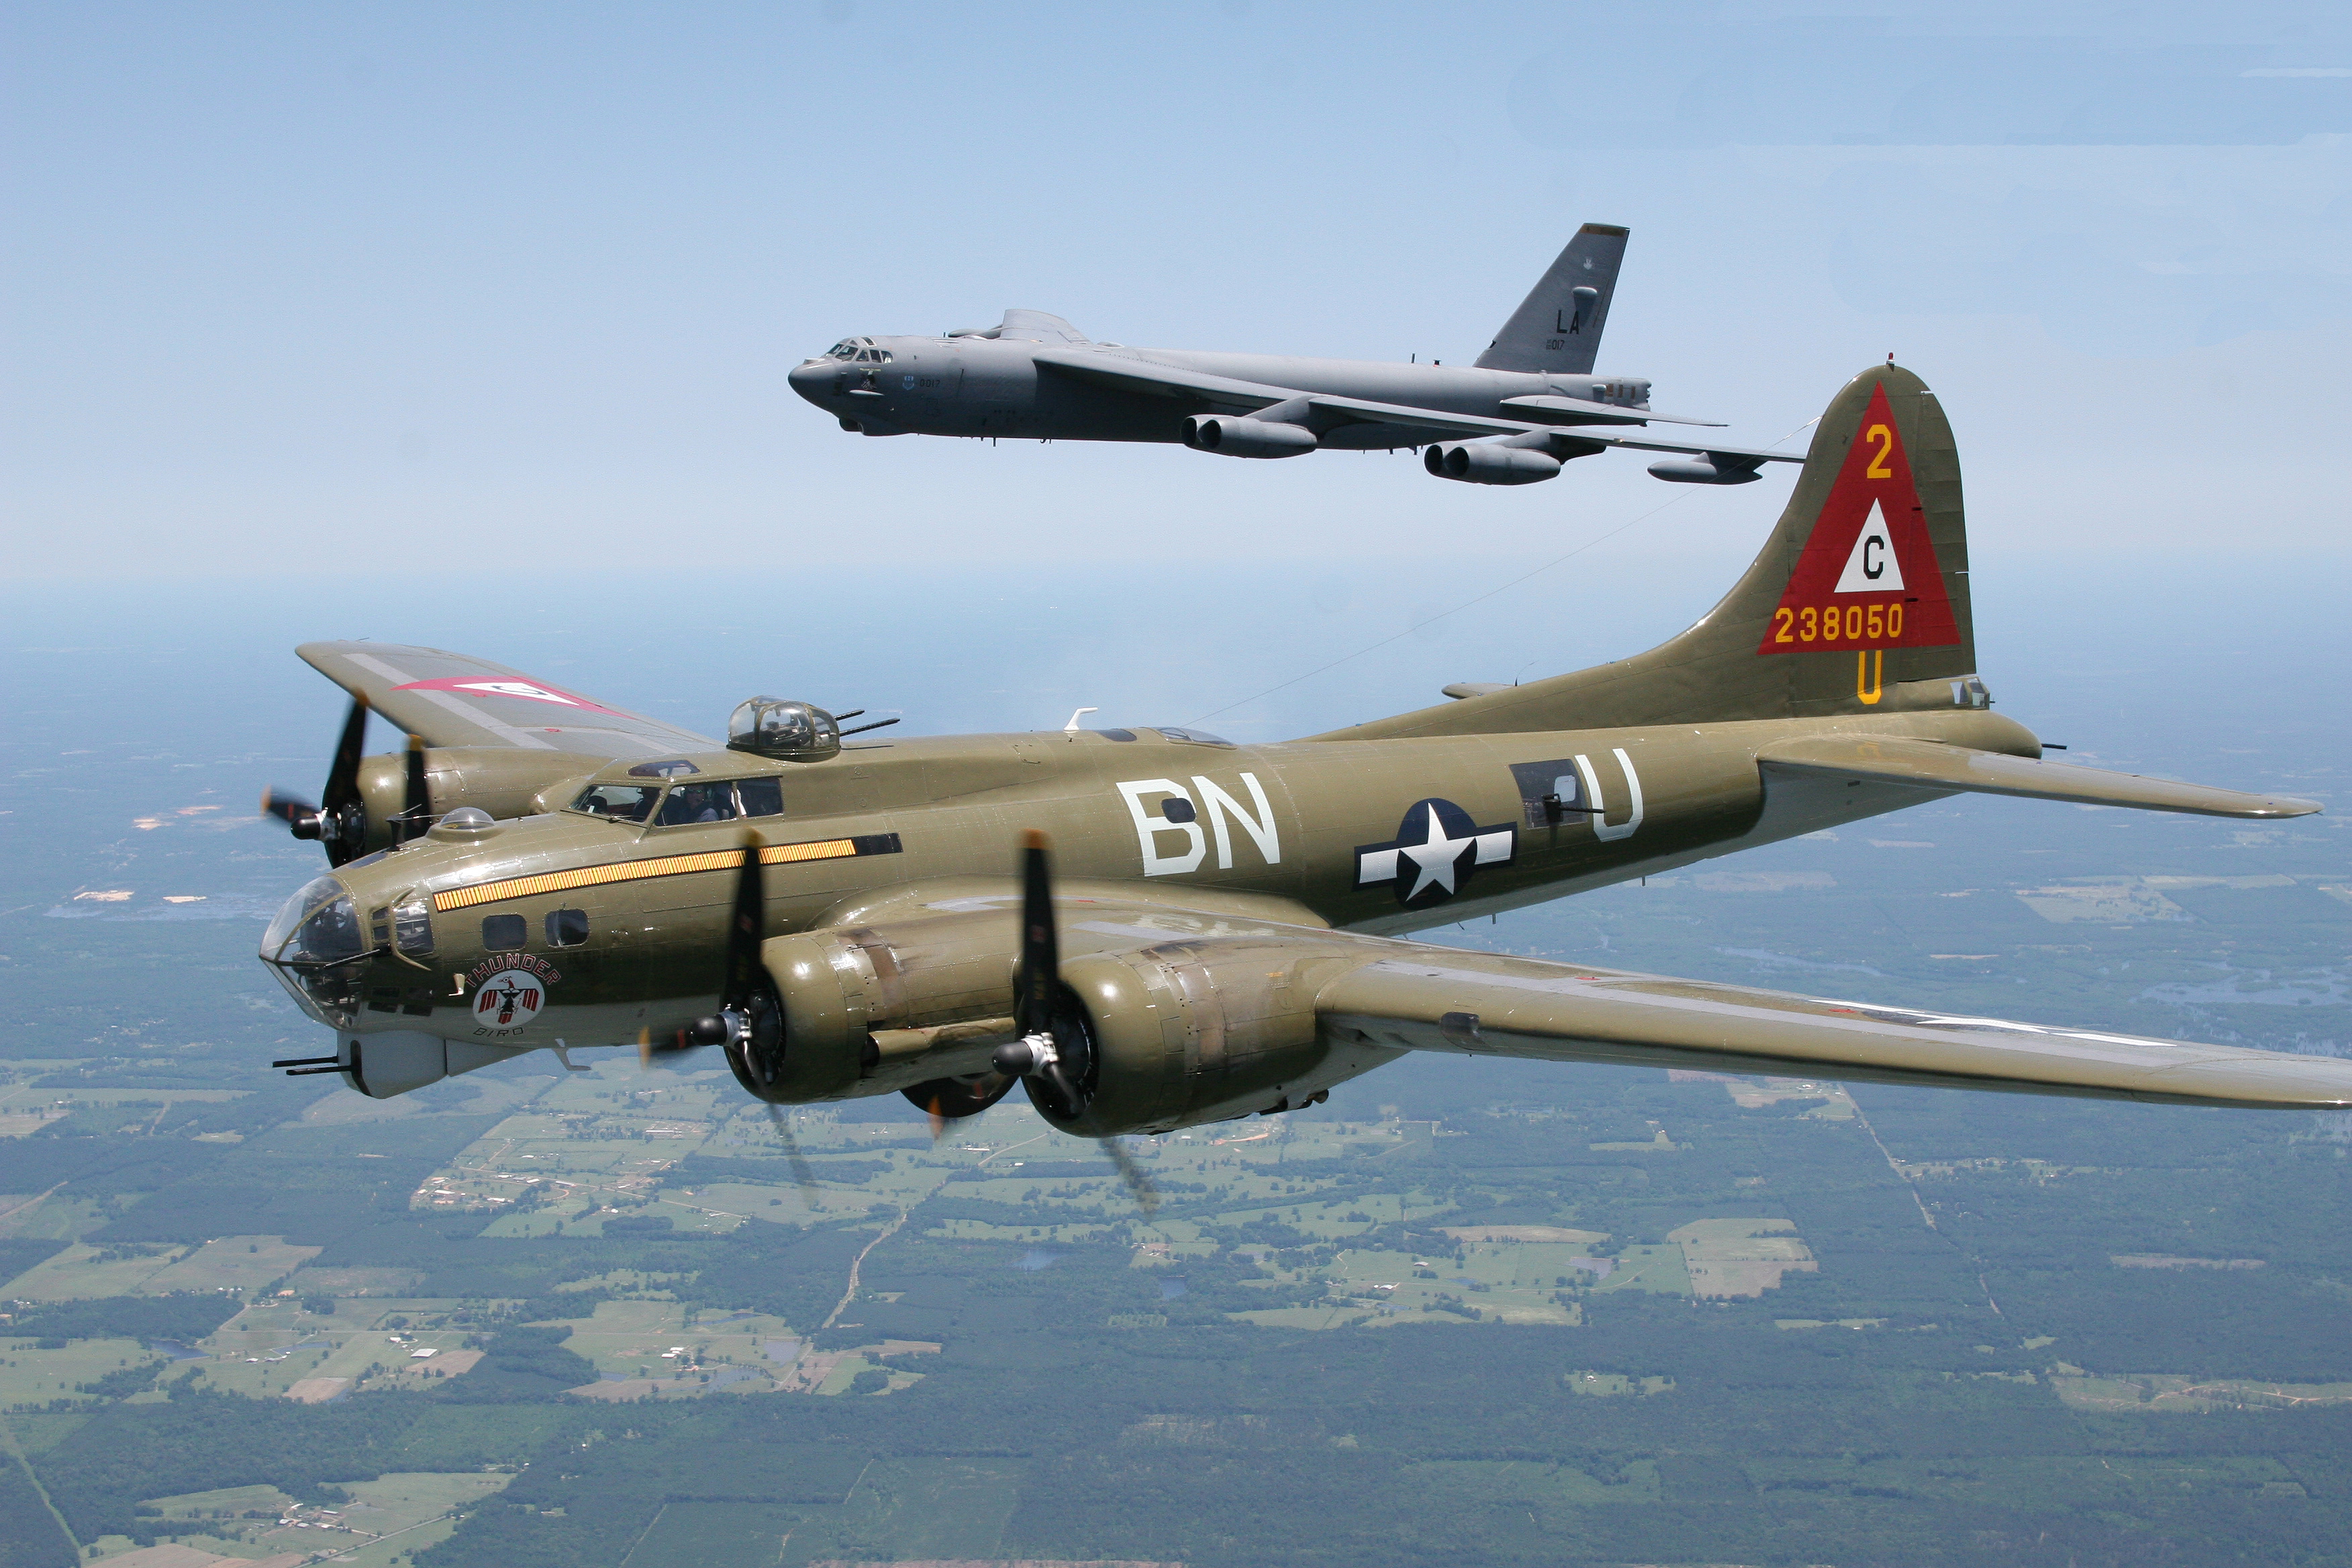 boeing b17 flying fortress Computer Wallpapers Desktop Backgrounds   1366x768  ID501241  Enemy B17 Fortress